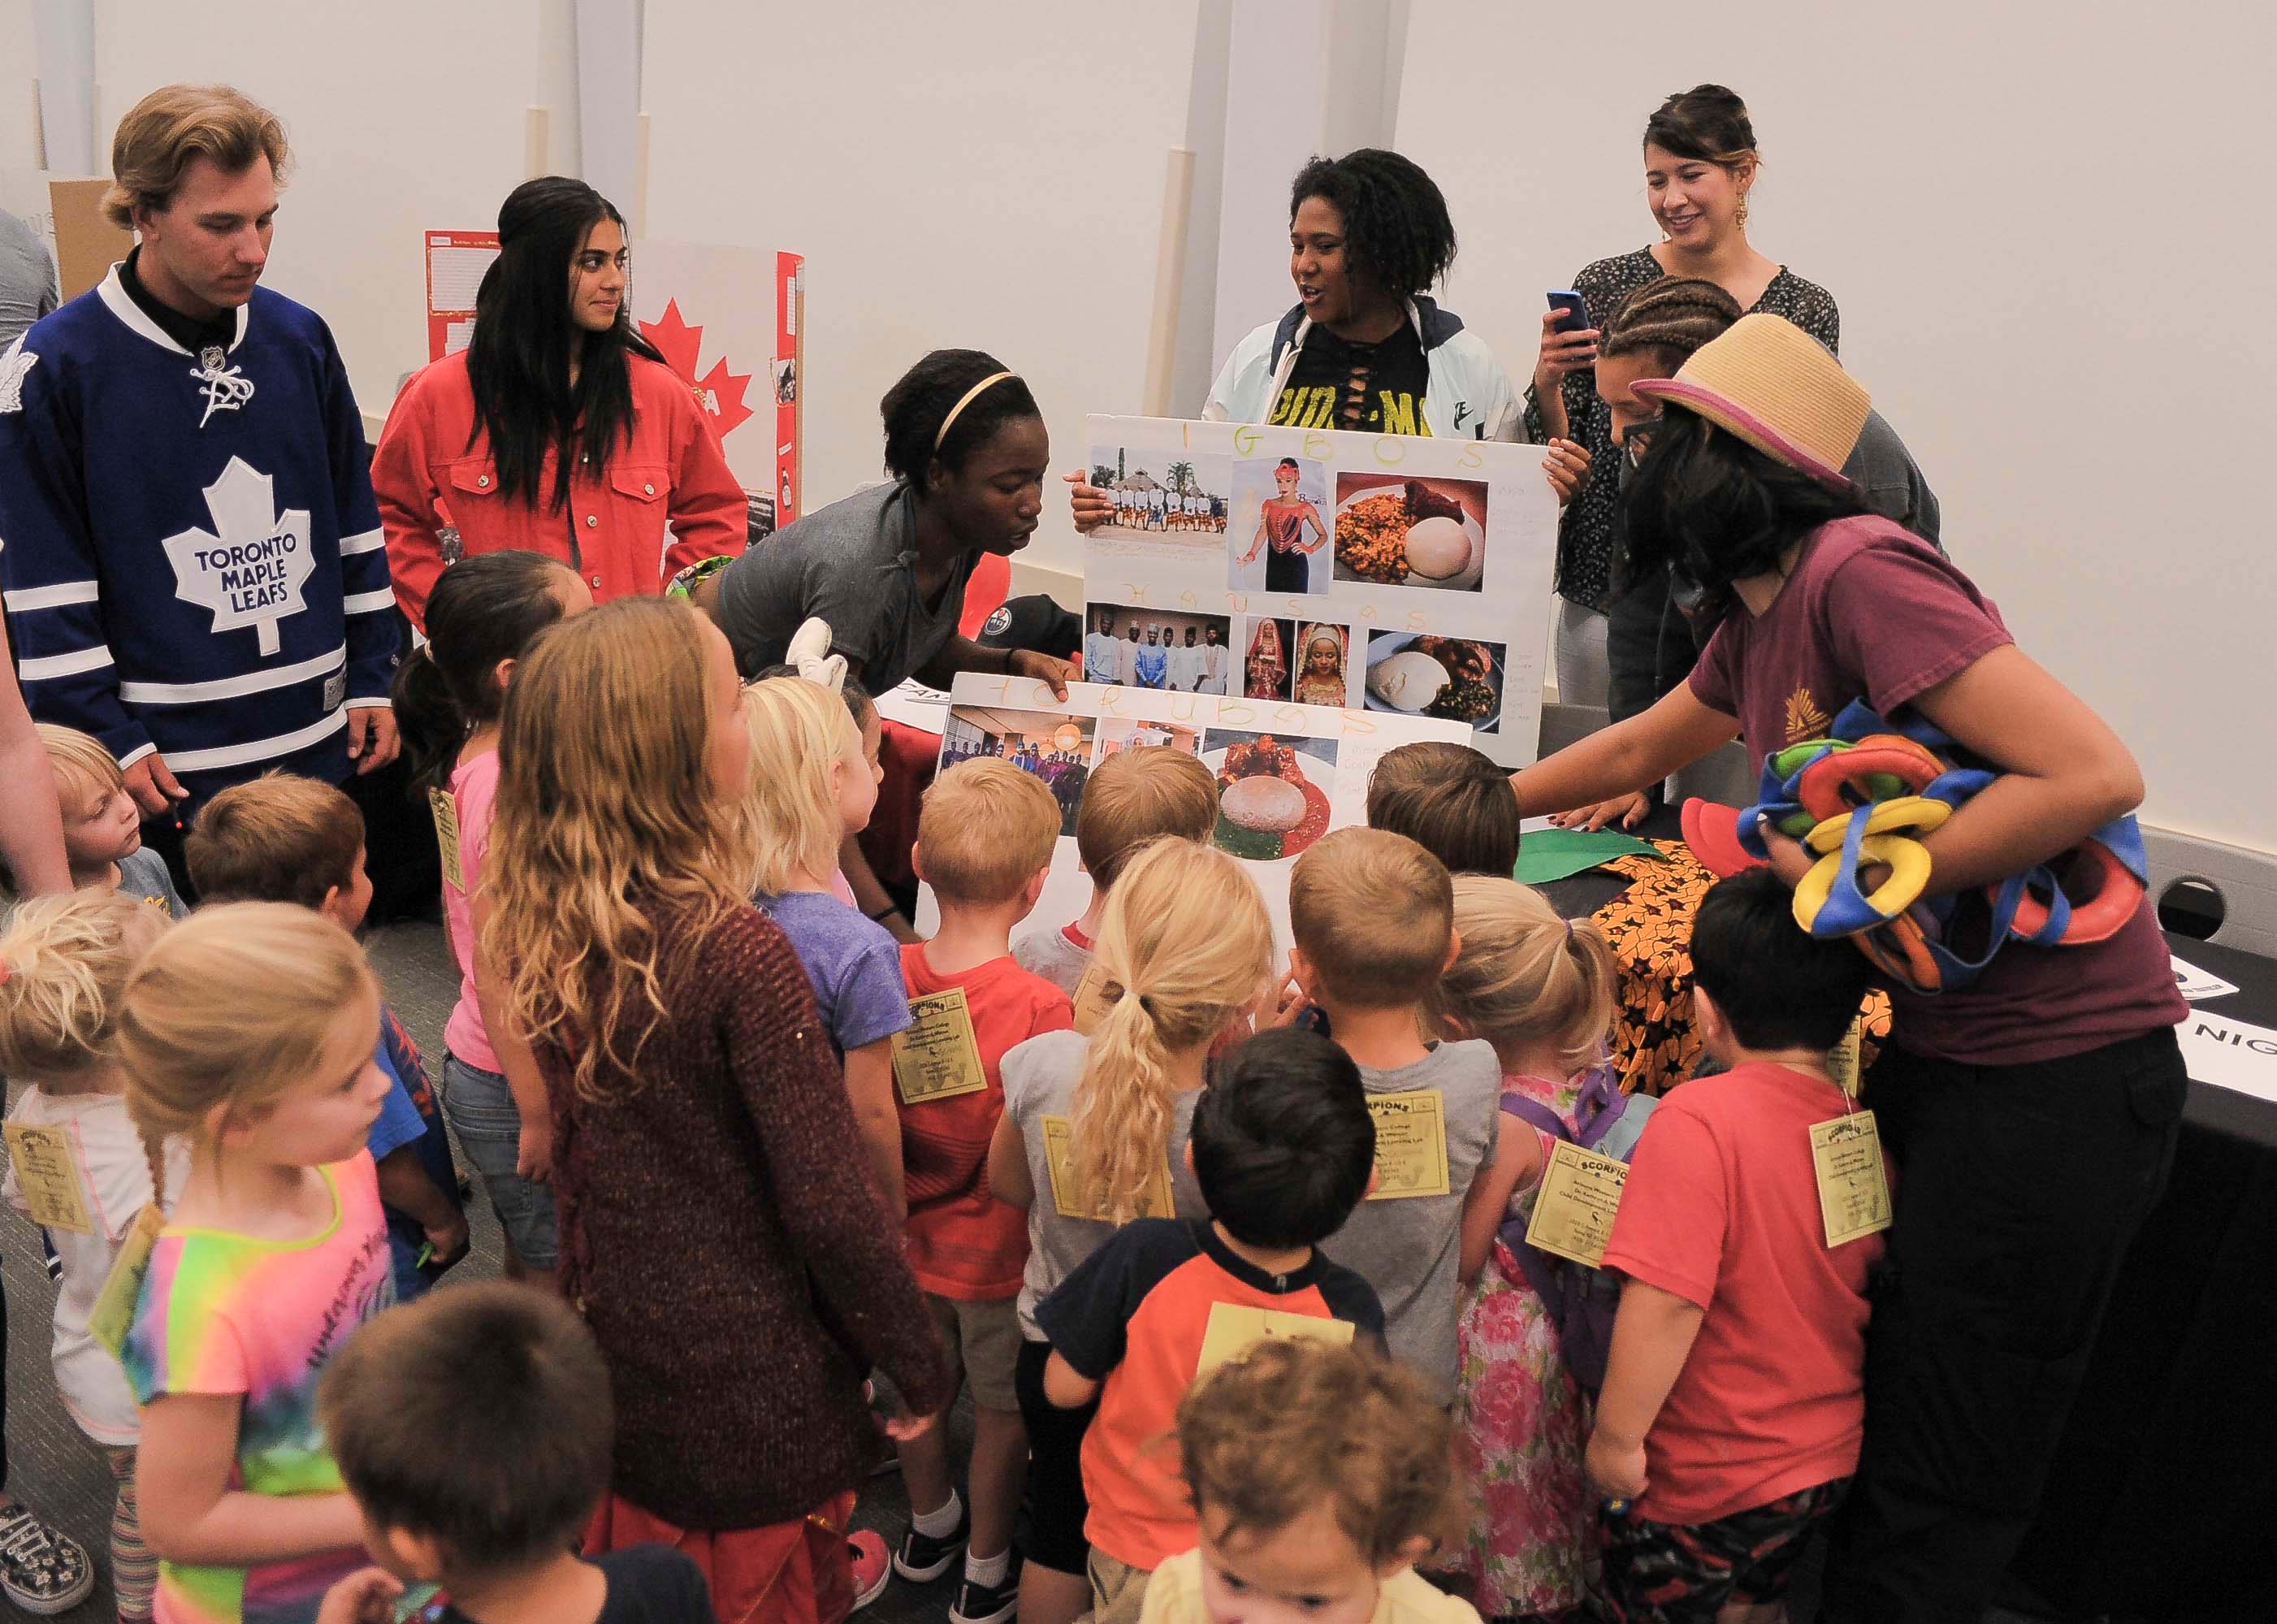 Young children are gathered around a display as AWC students explain various images.